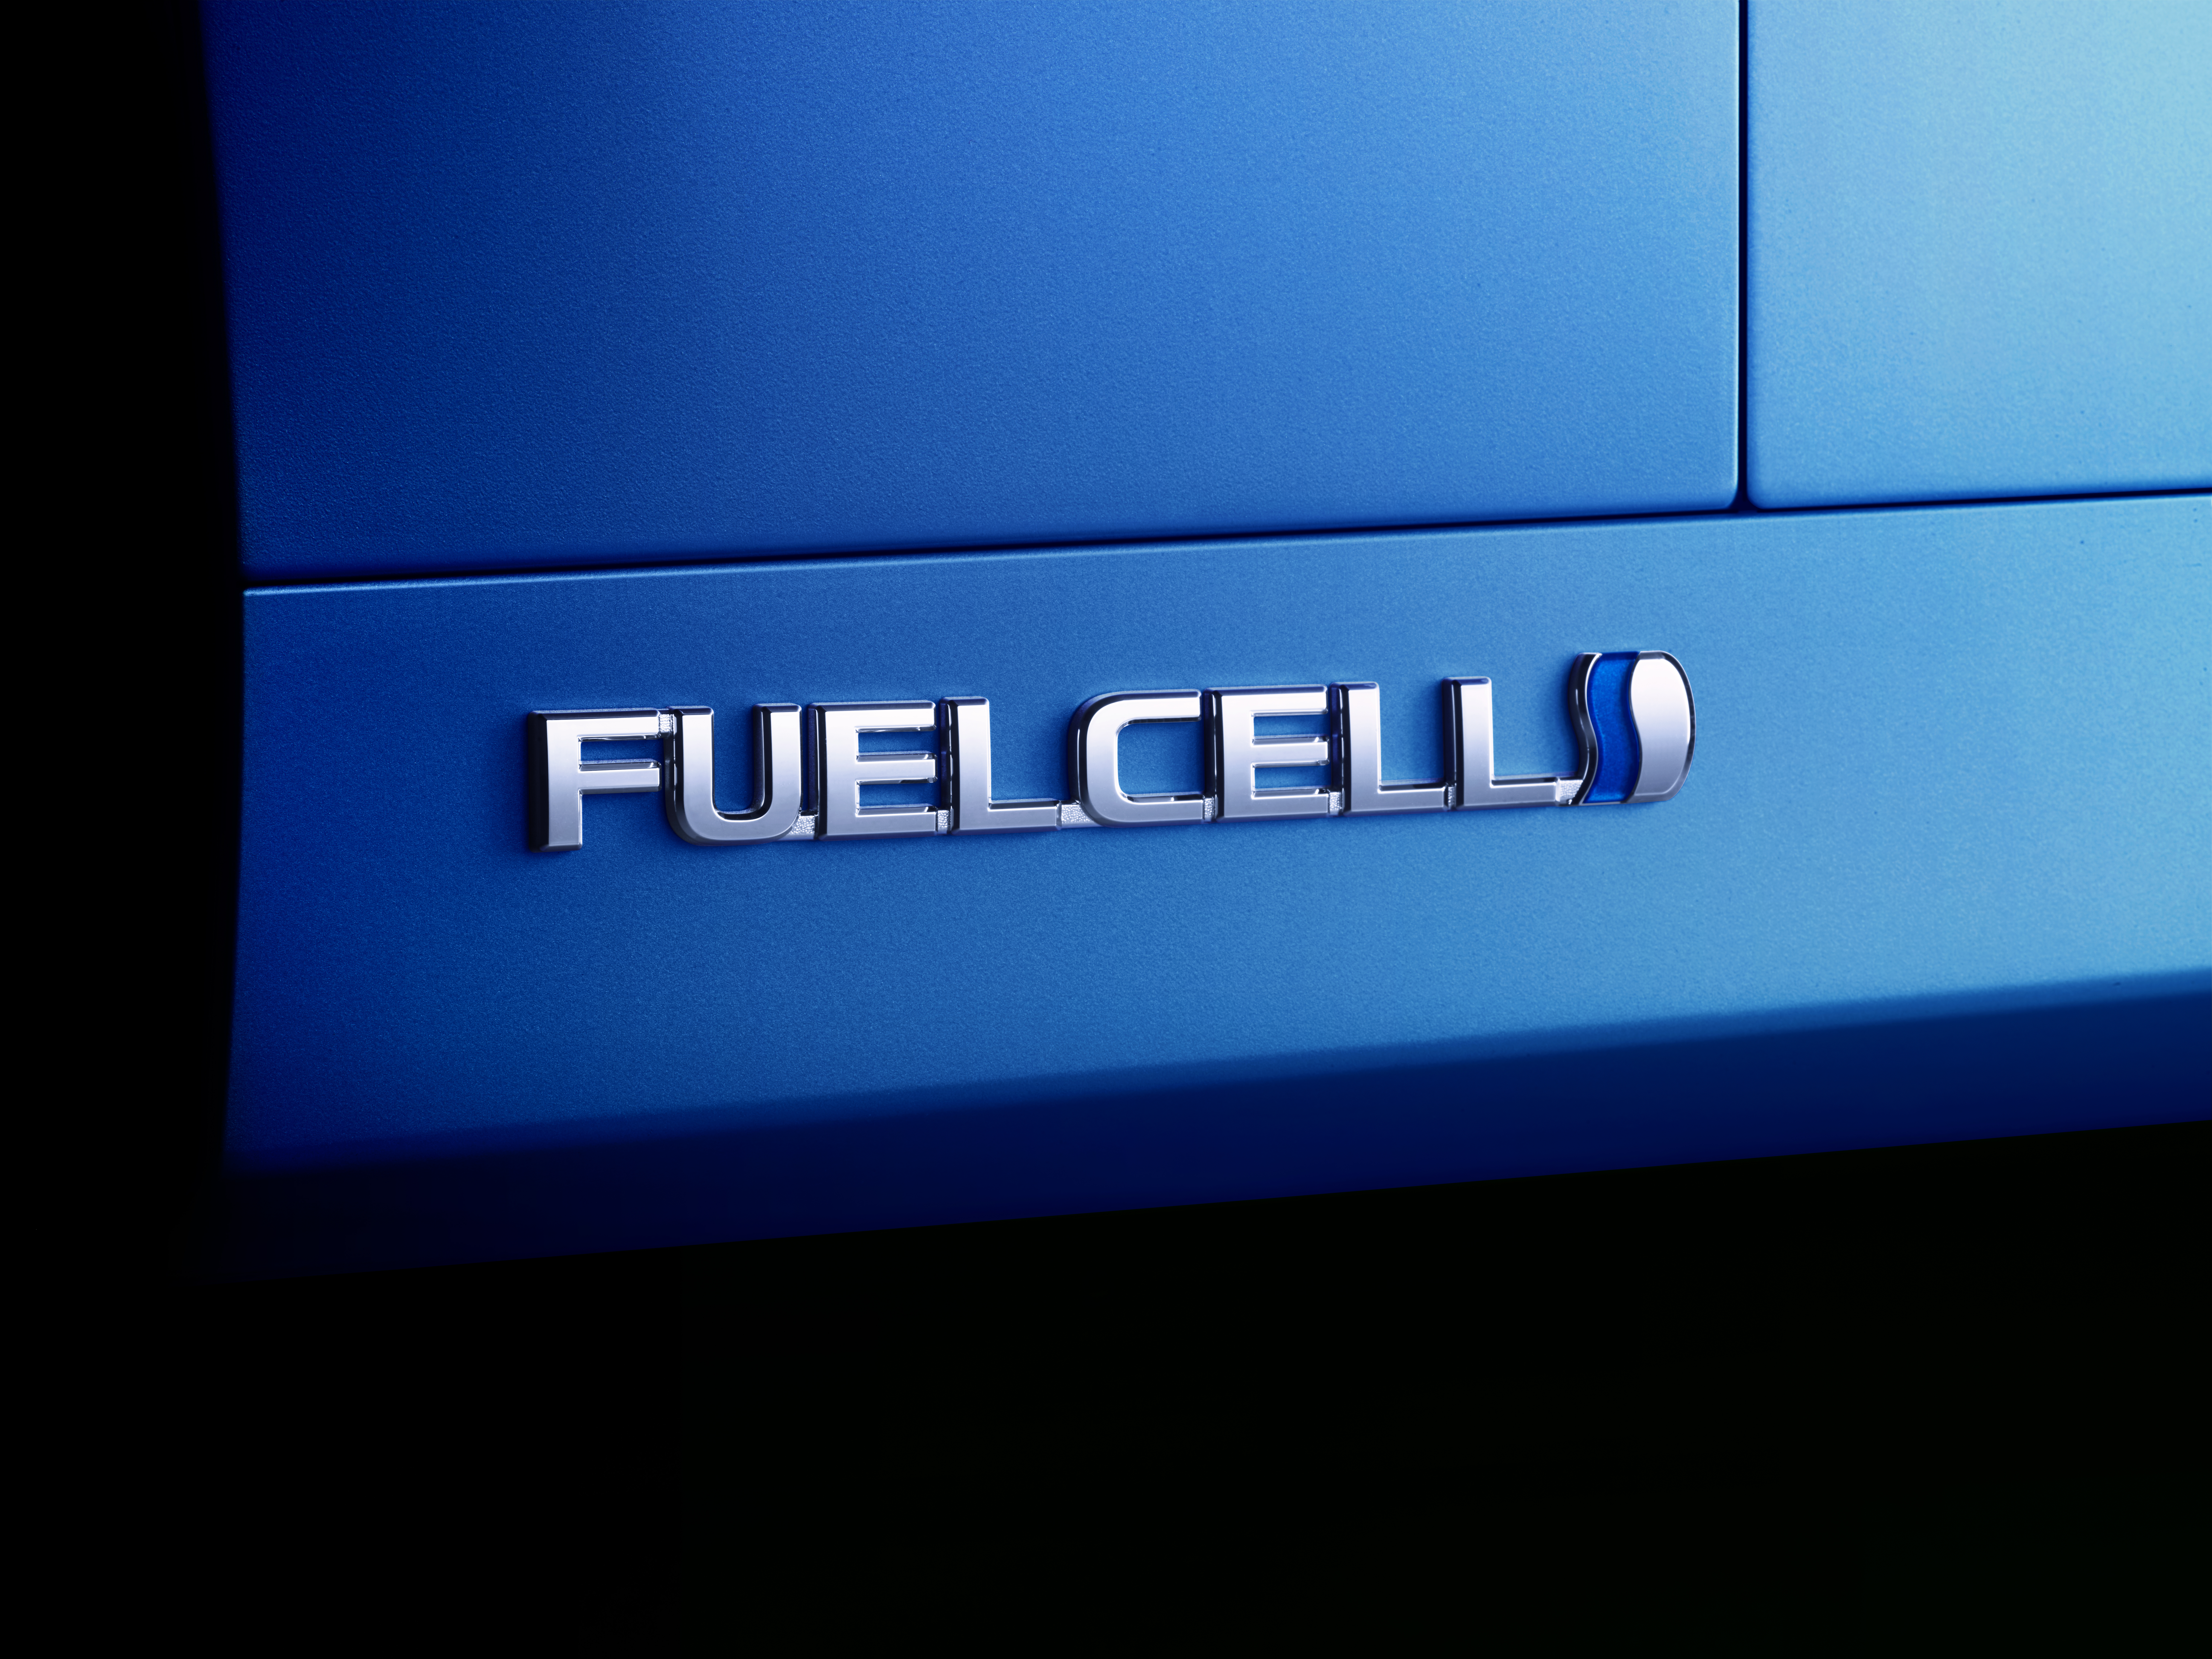 How do we answer critics of fuel cell technology?